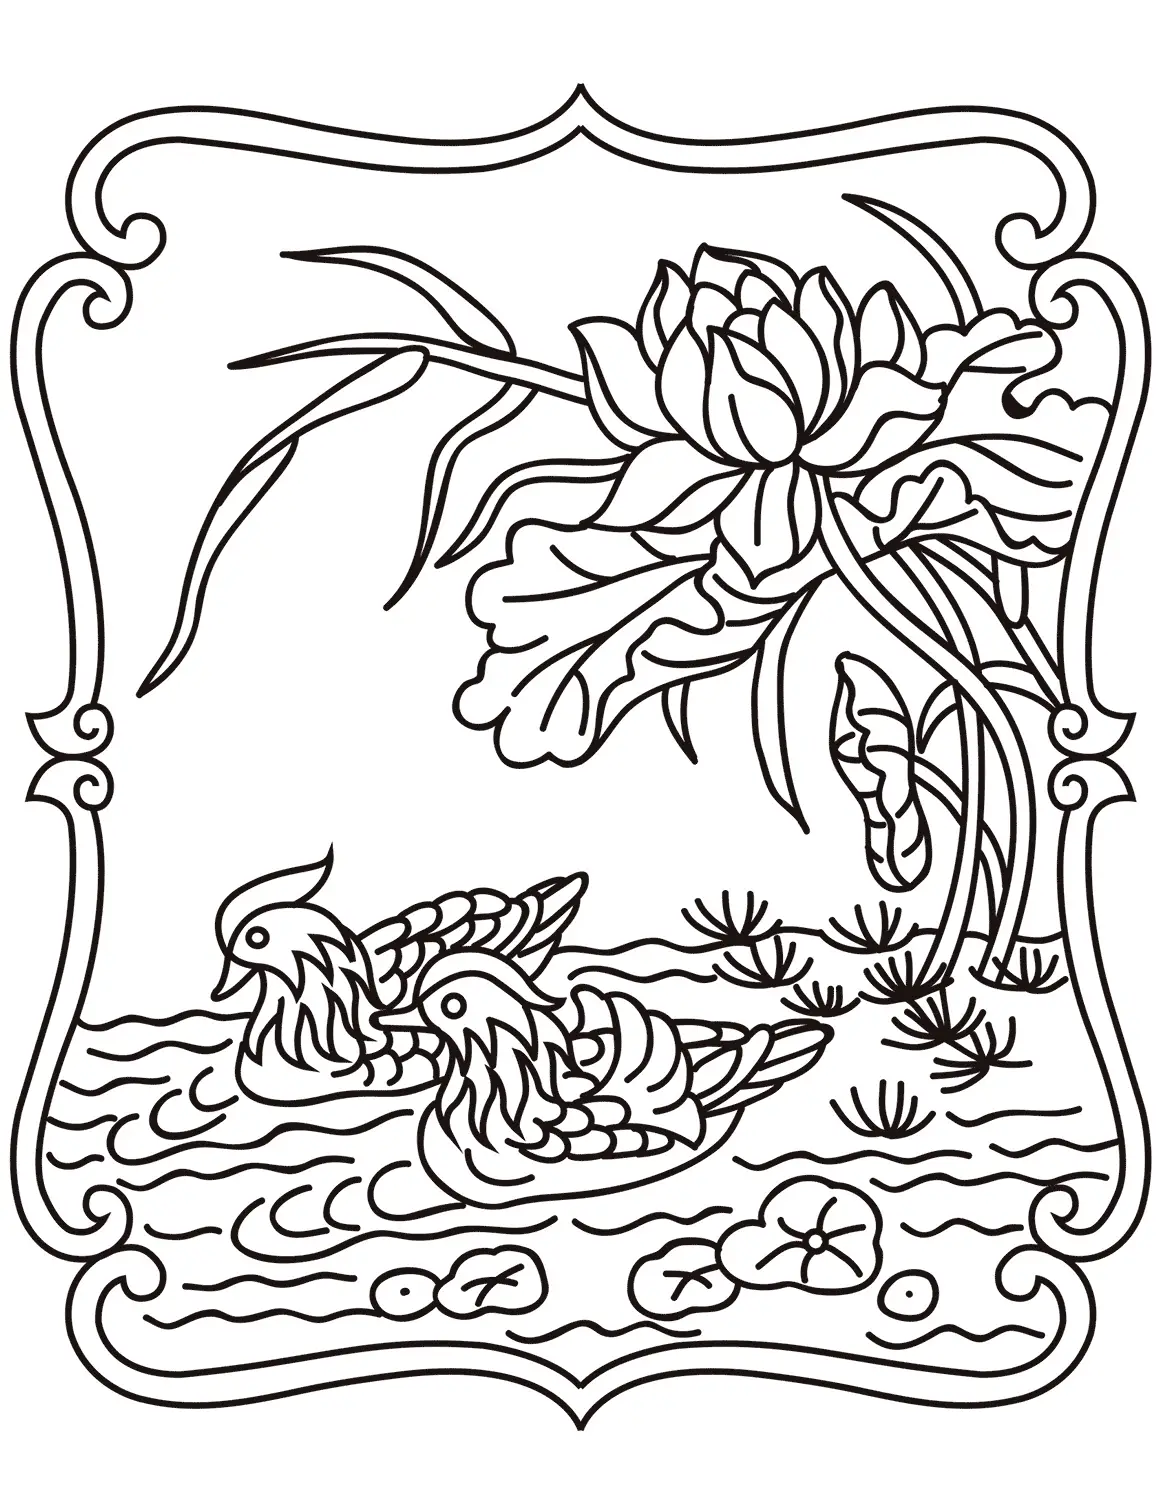 CHINESE EGRET BIRD Traditional Beautiful Mandala Coloring Pages for Kids Adults Boredom Art Activities Line Art